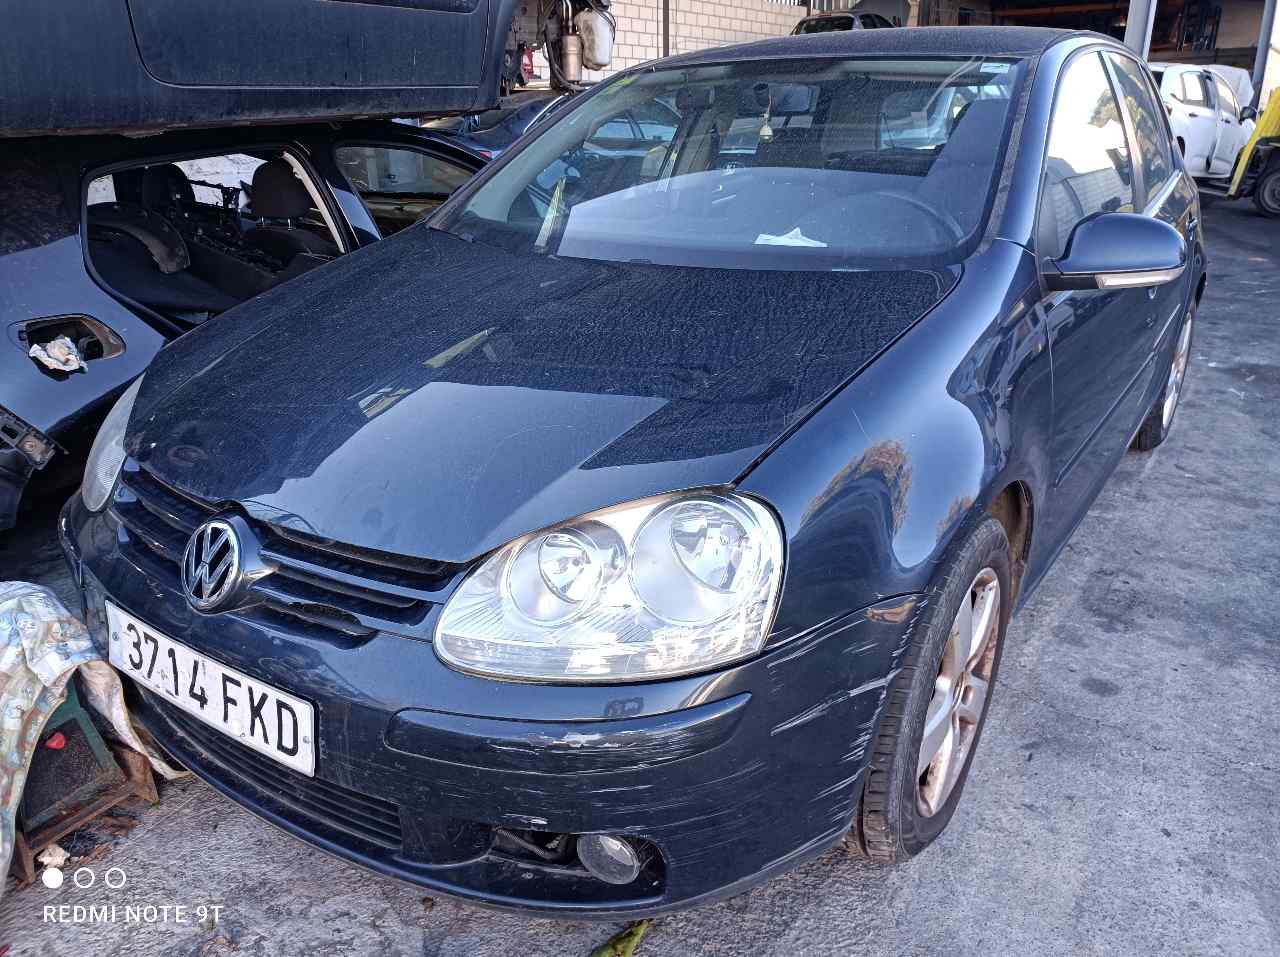 VOLKSWAGEN Golf 5 generation (2003-2009) Other Engine Compartment Parts 1K0199262AS 19025995